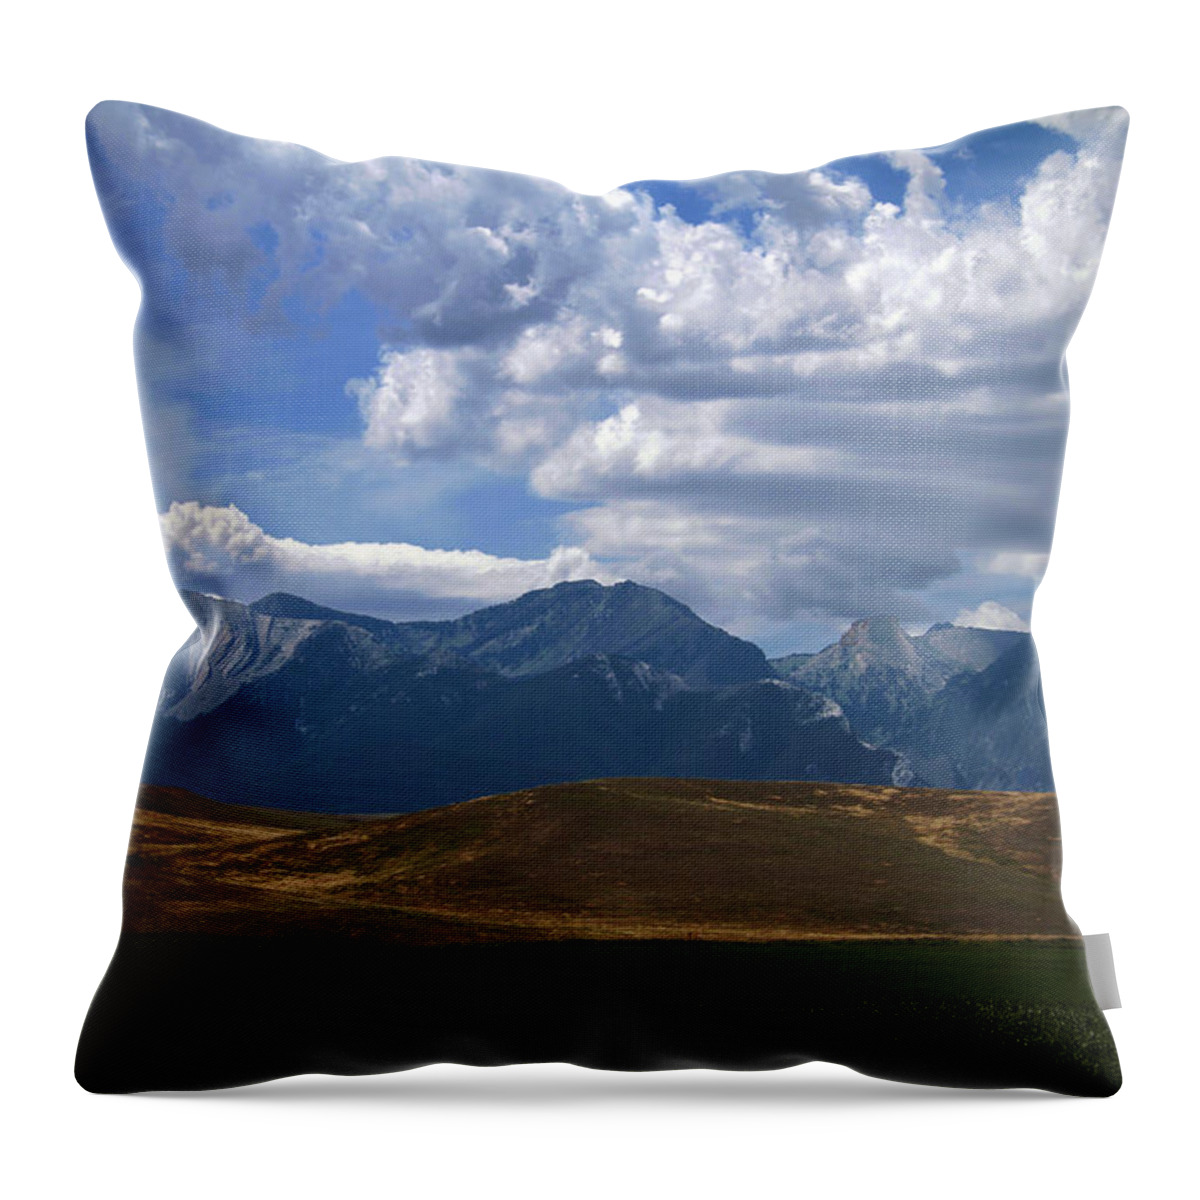 Montana Mountains Throw Pillow featuring the photograph Pause And Reflect by Joseph Noonan